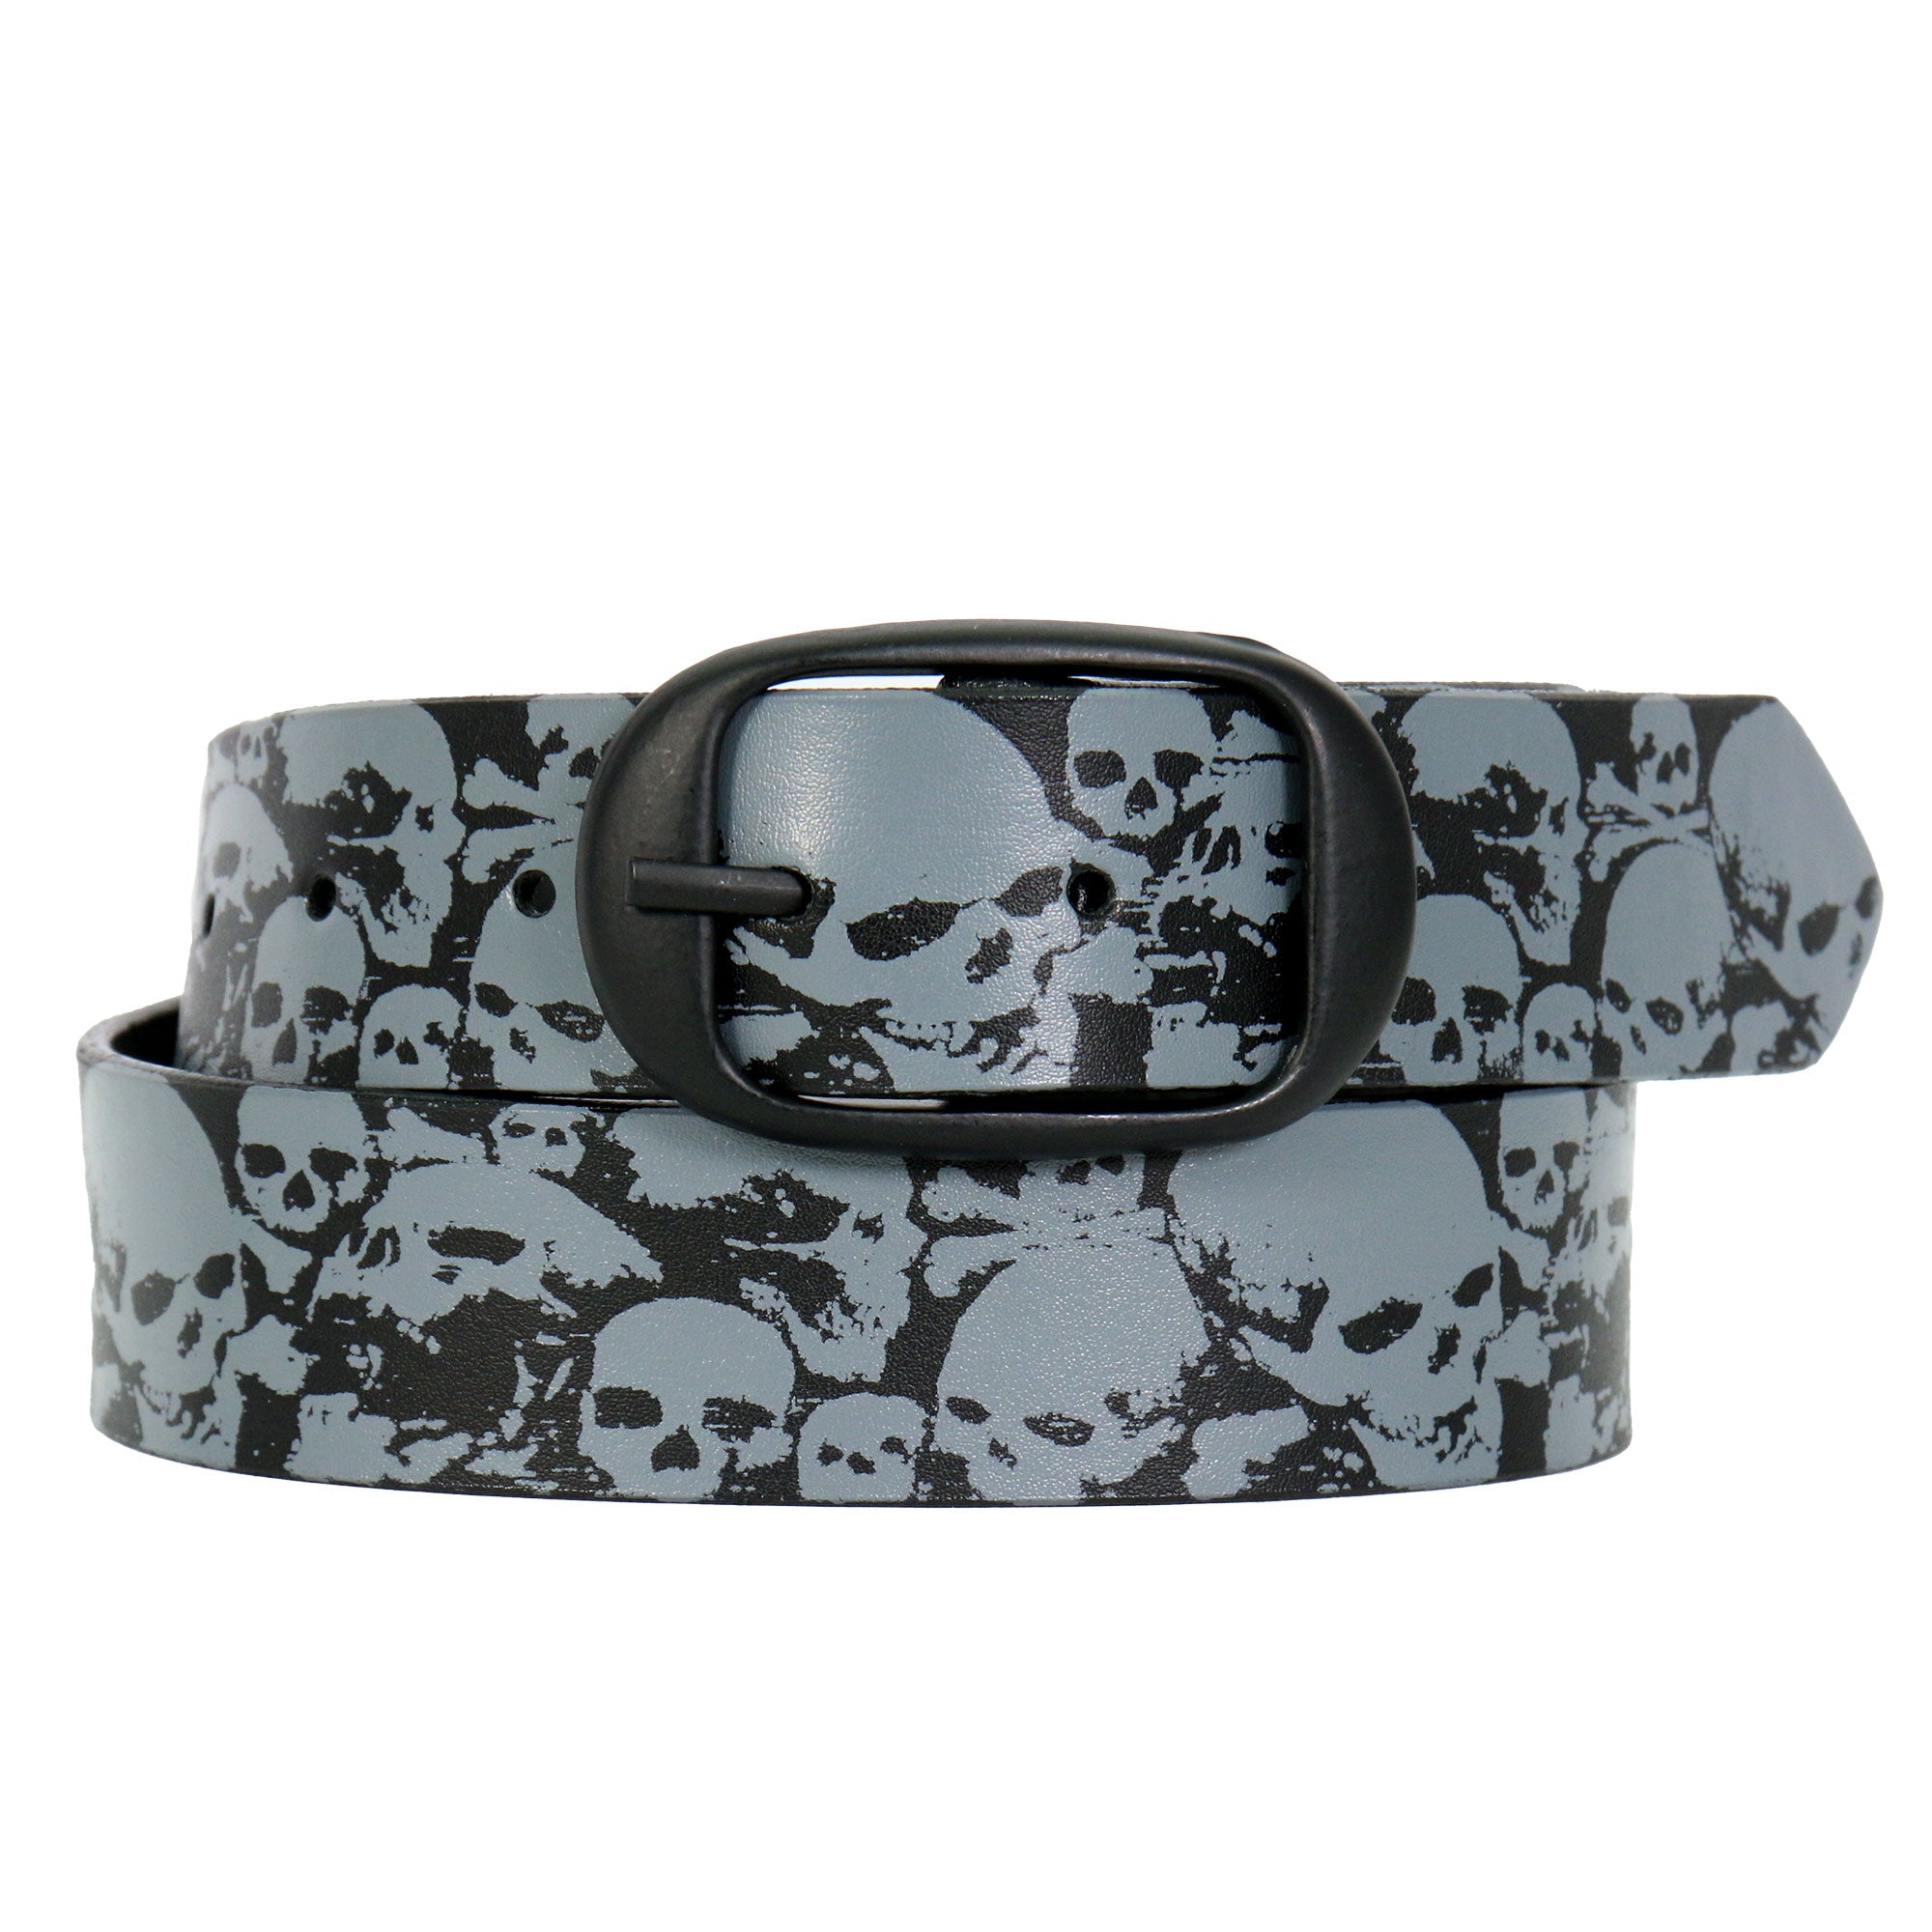 Hot Leathers Ancient Skulls Black and Gray Leather Belt BLA1130